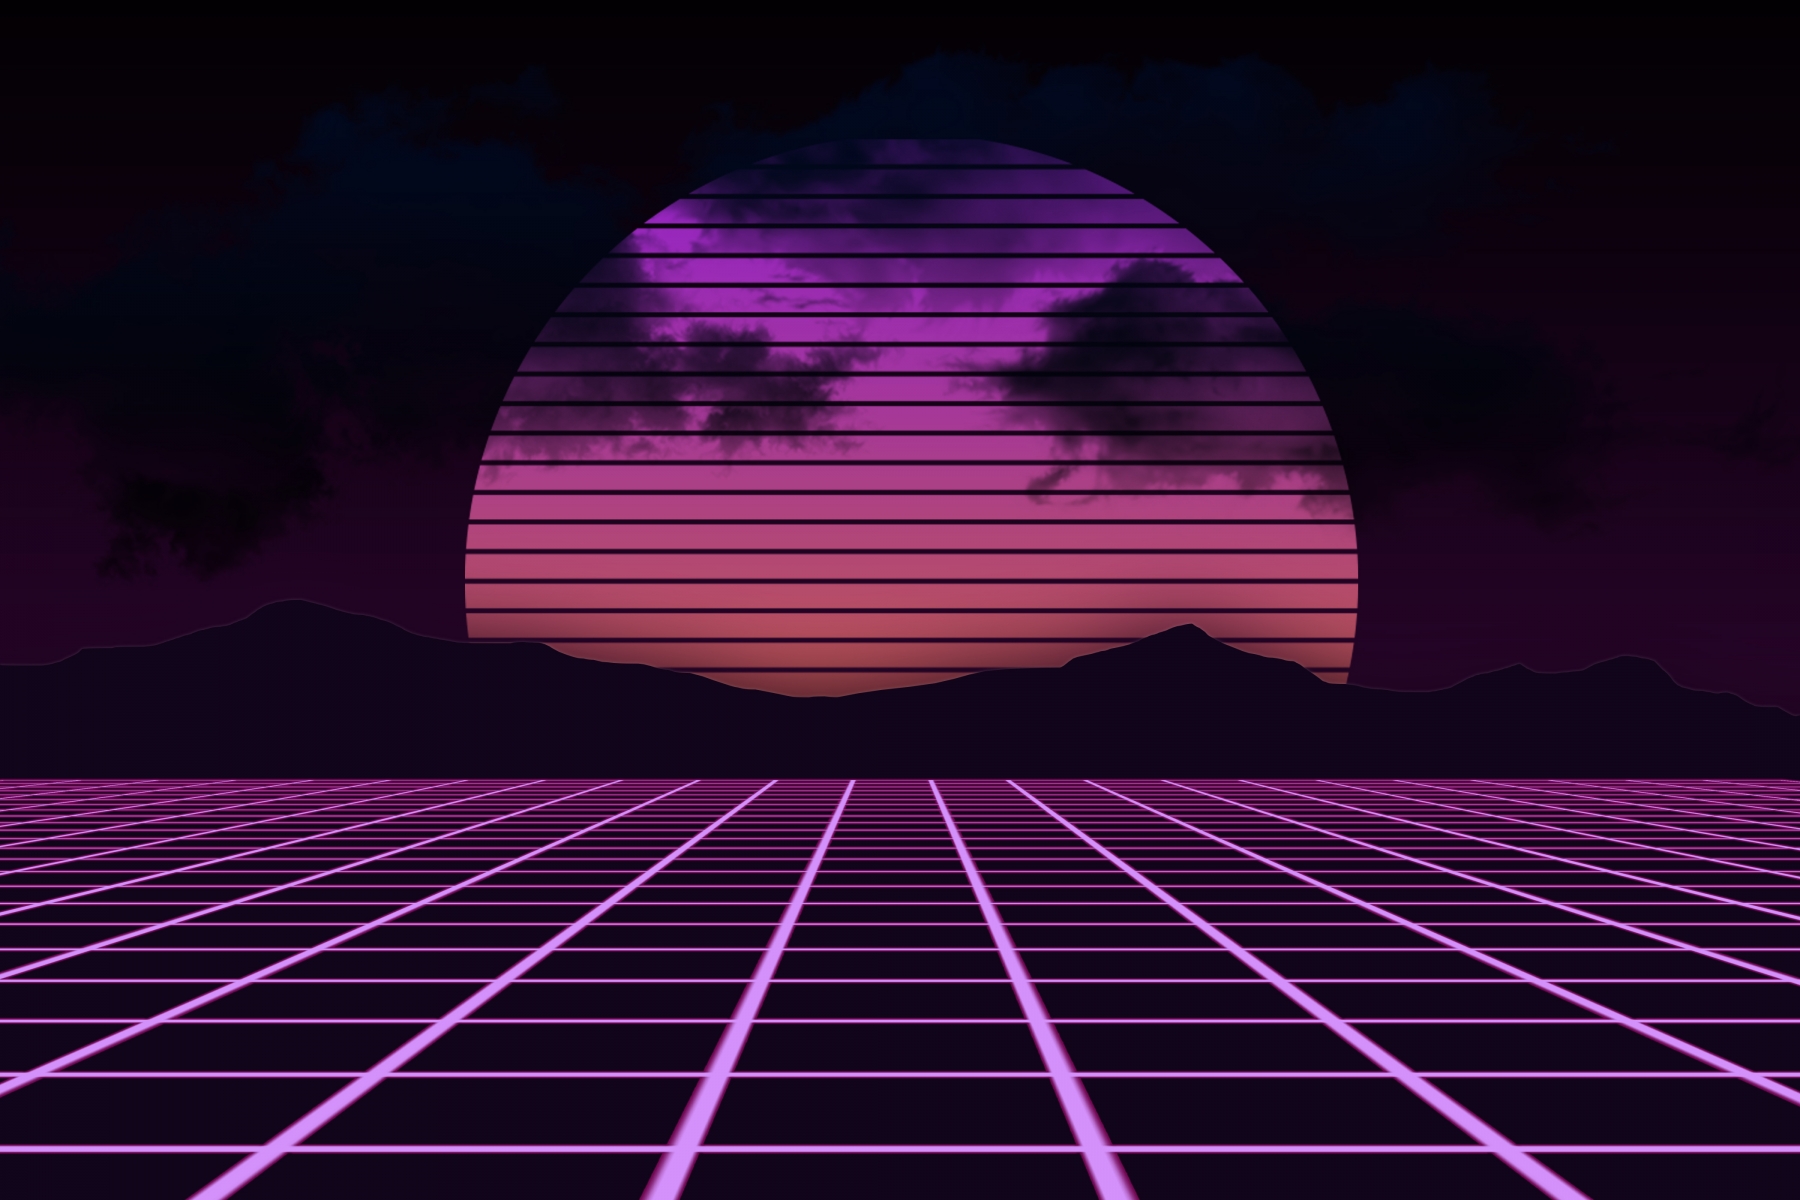 Artistic retro wave hd static wallpapers and background images â yl computing